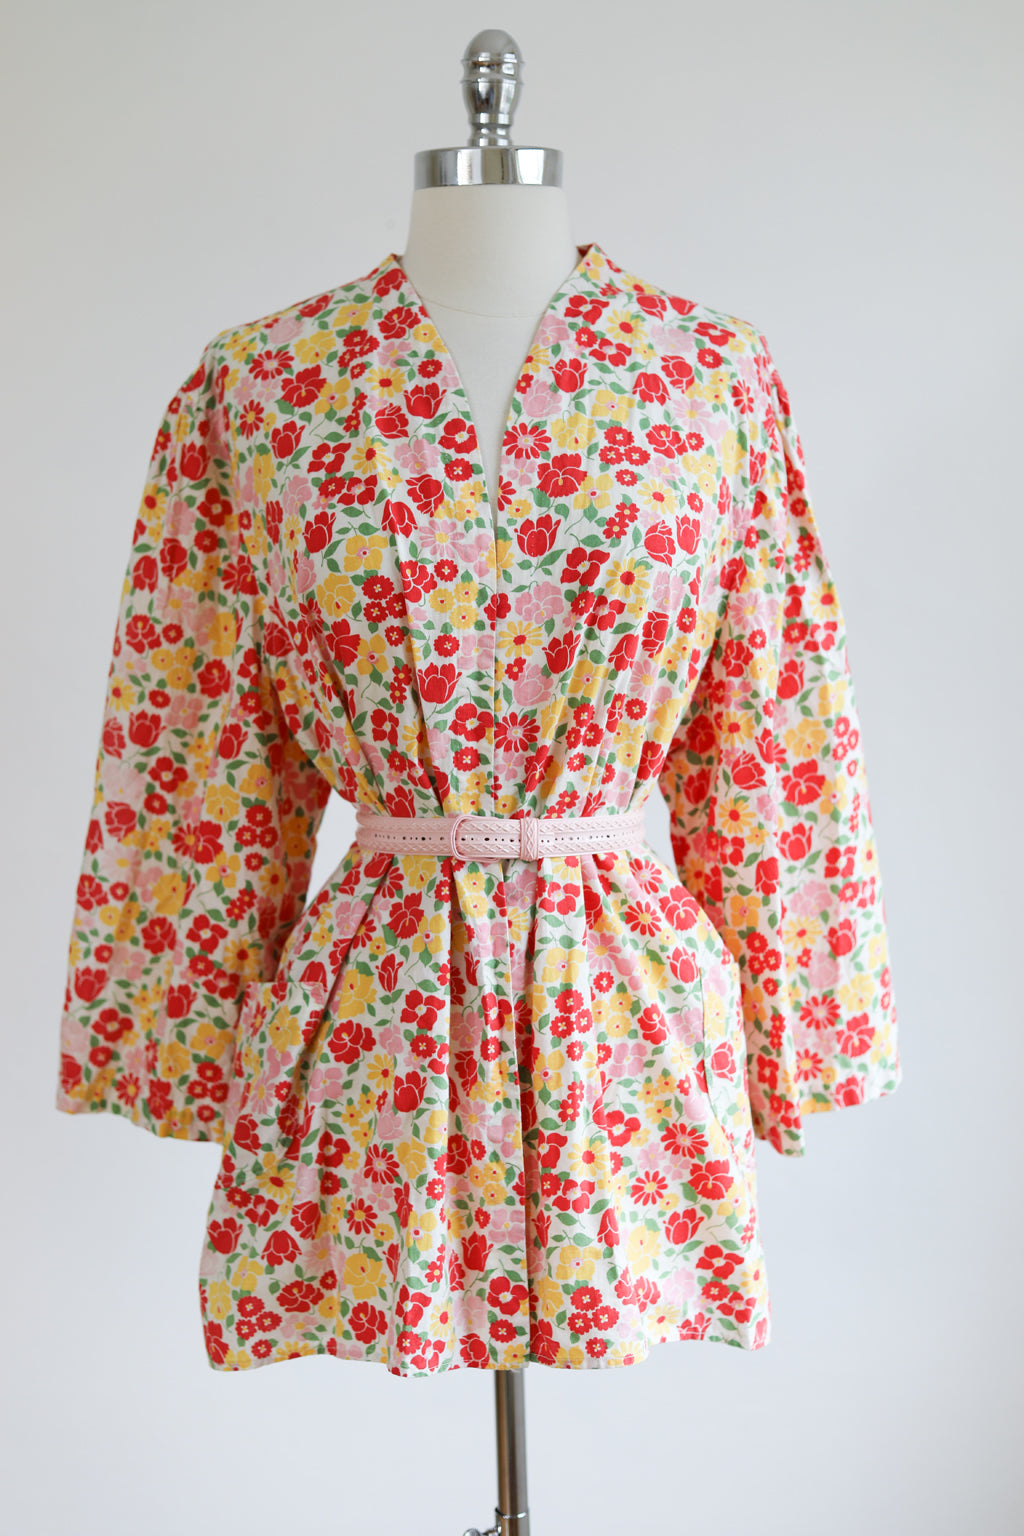 Vintage 1930s to 1940s Chore Coat -  Darling VOLUP Cotton Juicy Spring Print Artist's Smock or Loungewear Shirt Jacket Size XL XXL